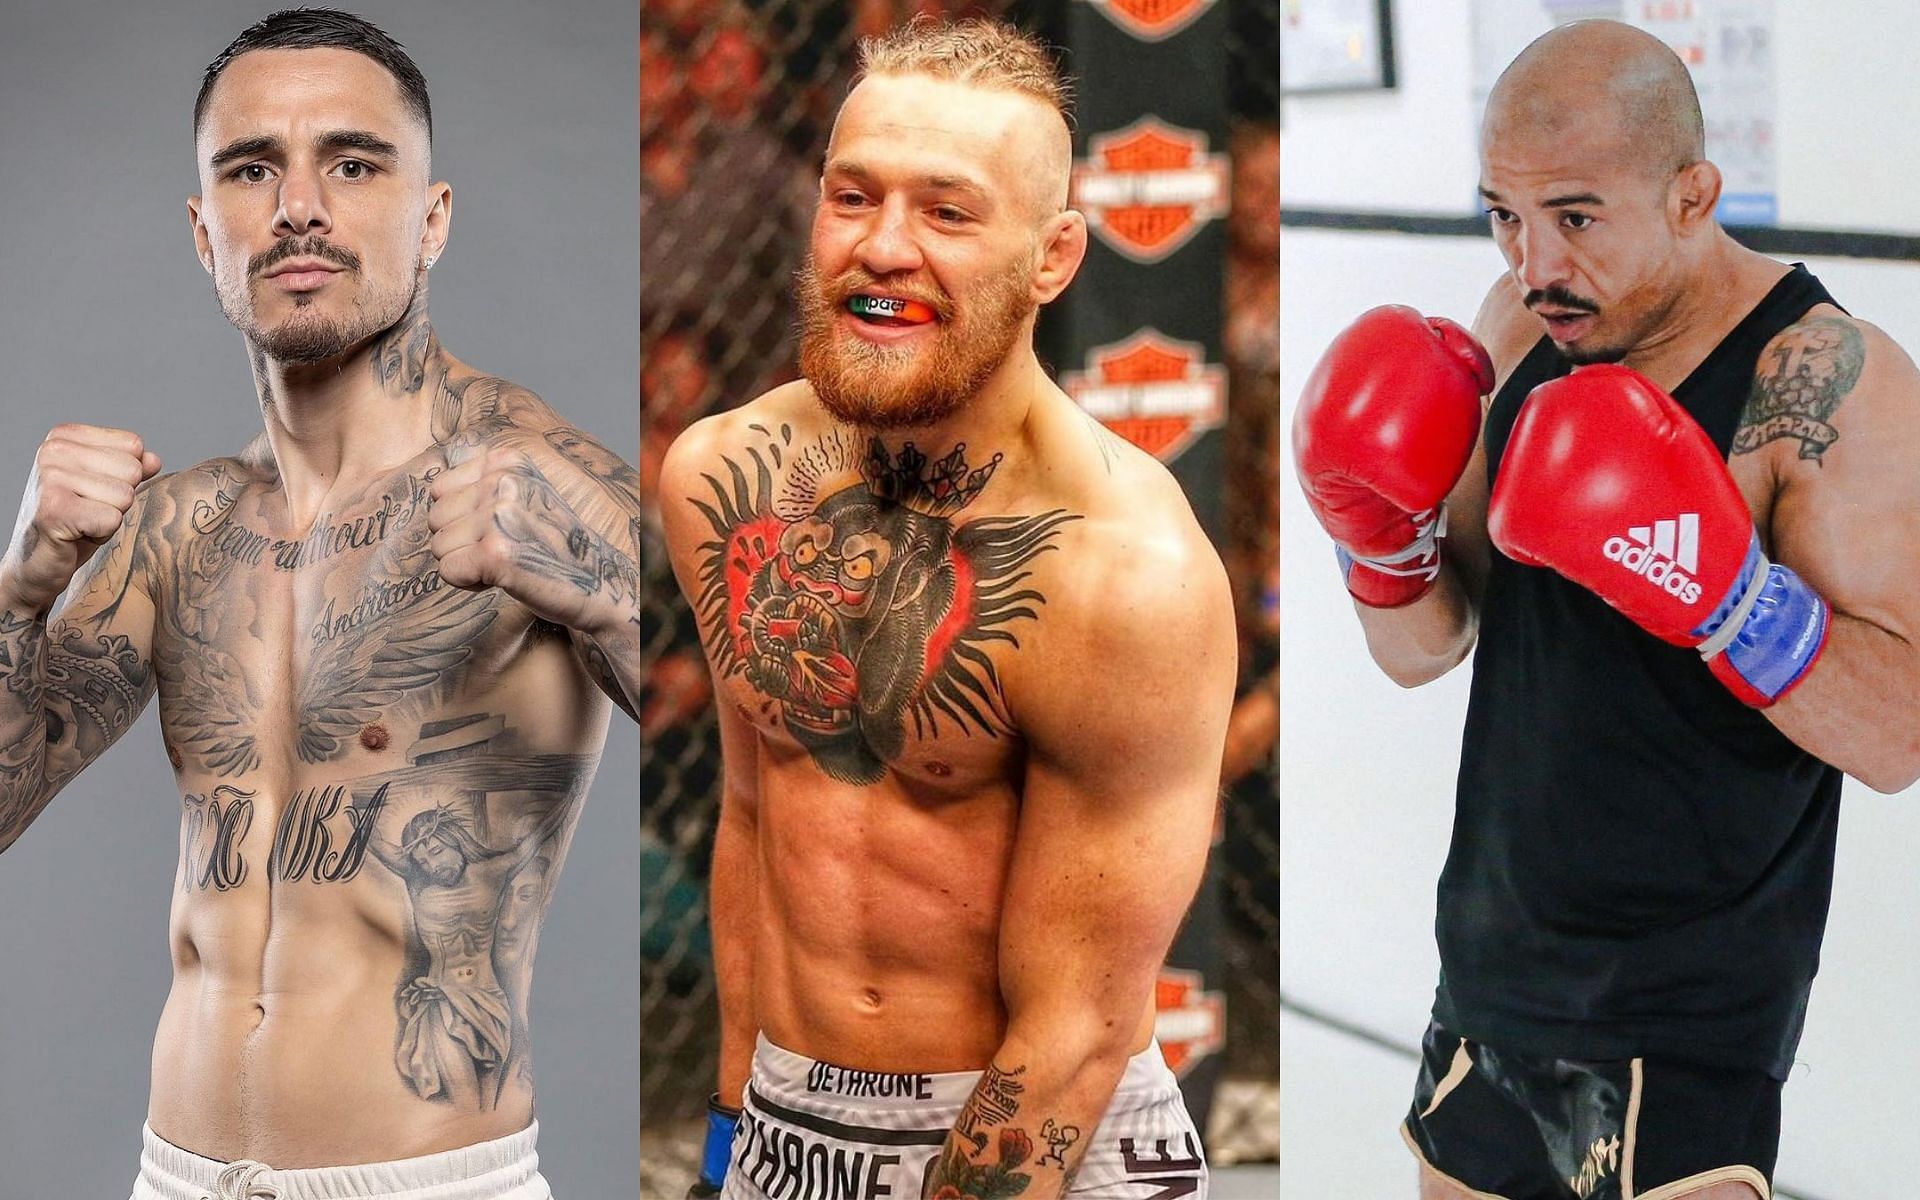 When George Kambosos Jr. (left) likened his then upcoming fight to Conor McGregor (middle) vs. Jose Aldo (right) [Images courtesy of @georgekambososjr @josealdojunioroficial and @thenotoriousmma on Instagram]